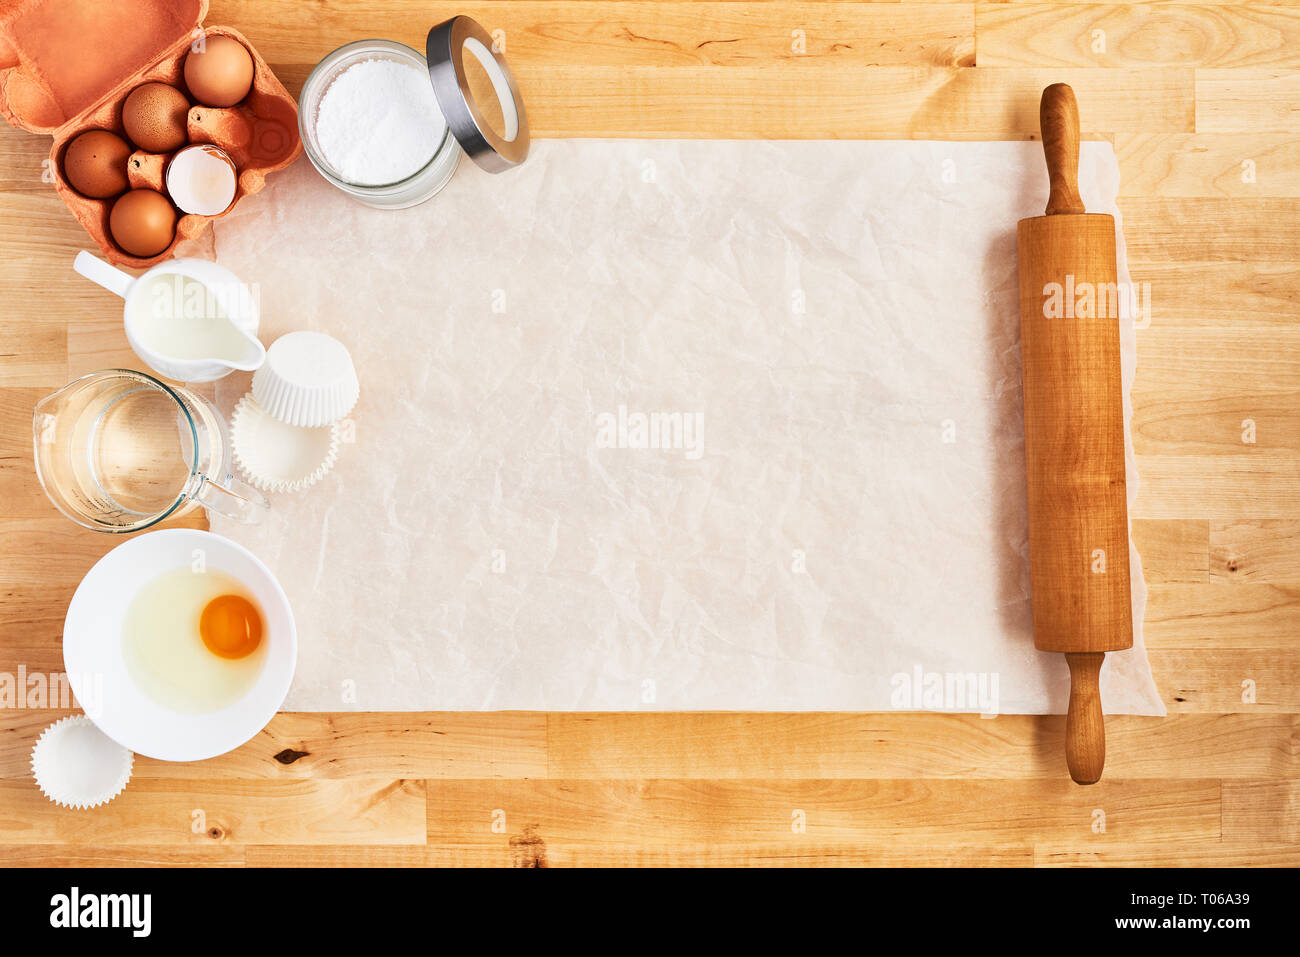 Rolling pin, food ingredients and kitchen utensils on crumpled piece of white parchment or baking paper on wooden table. Baking background concept. To Stock Photo